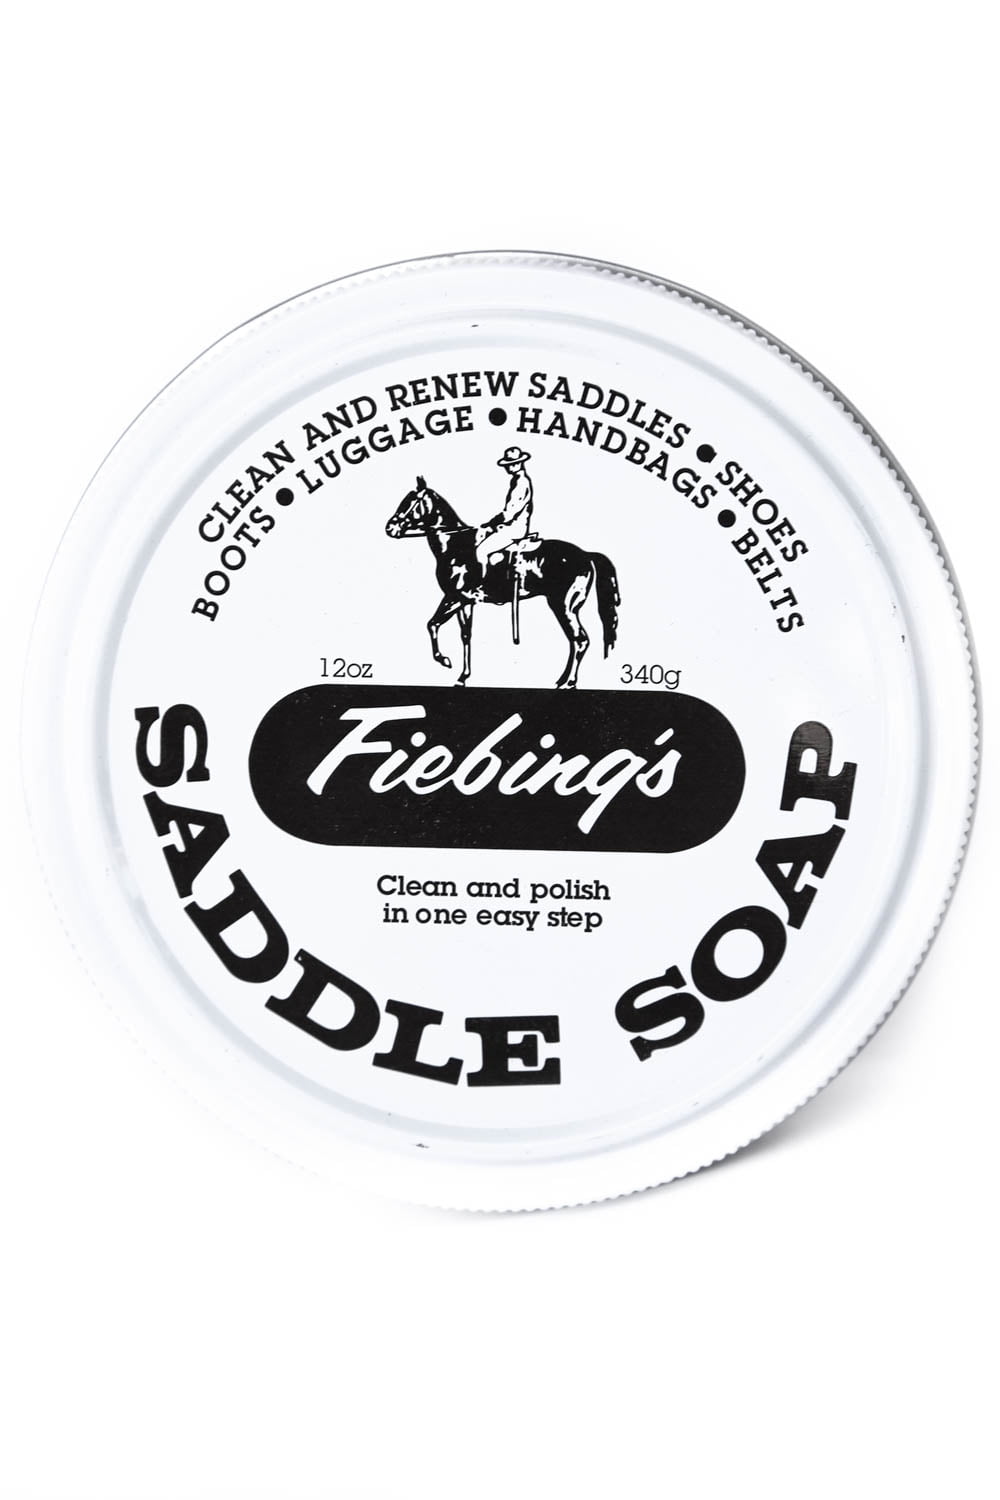 Saddle Soap For Leather Boots  How To Clean And Condition With Saddle Soap